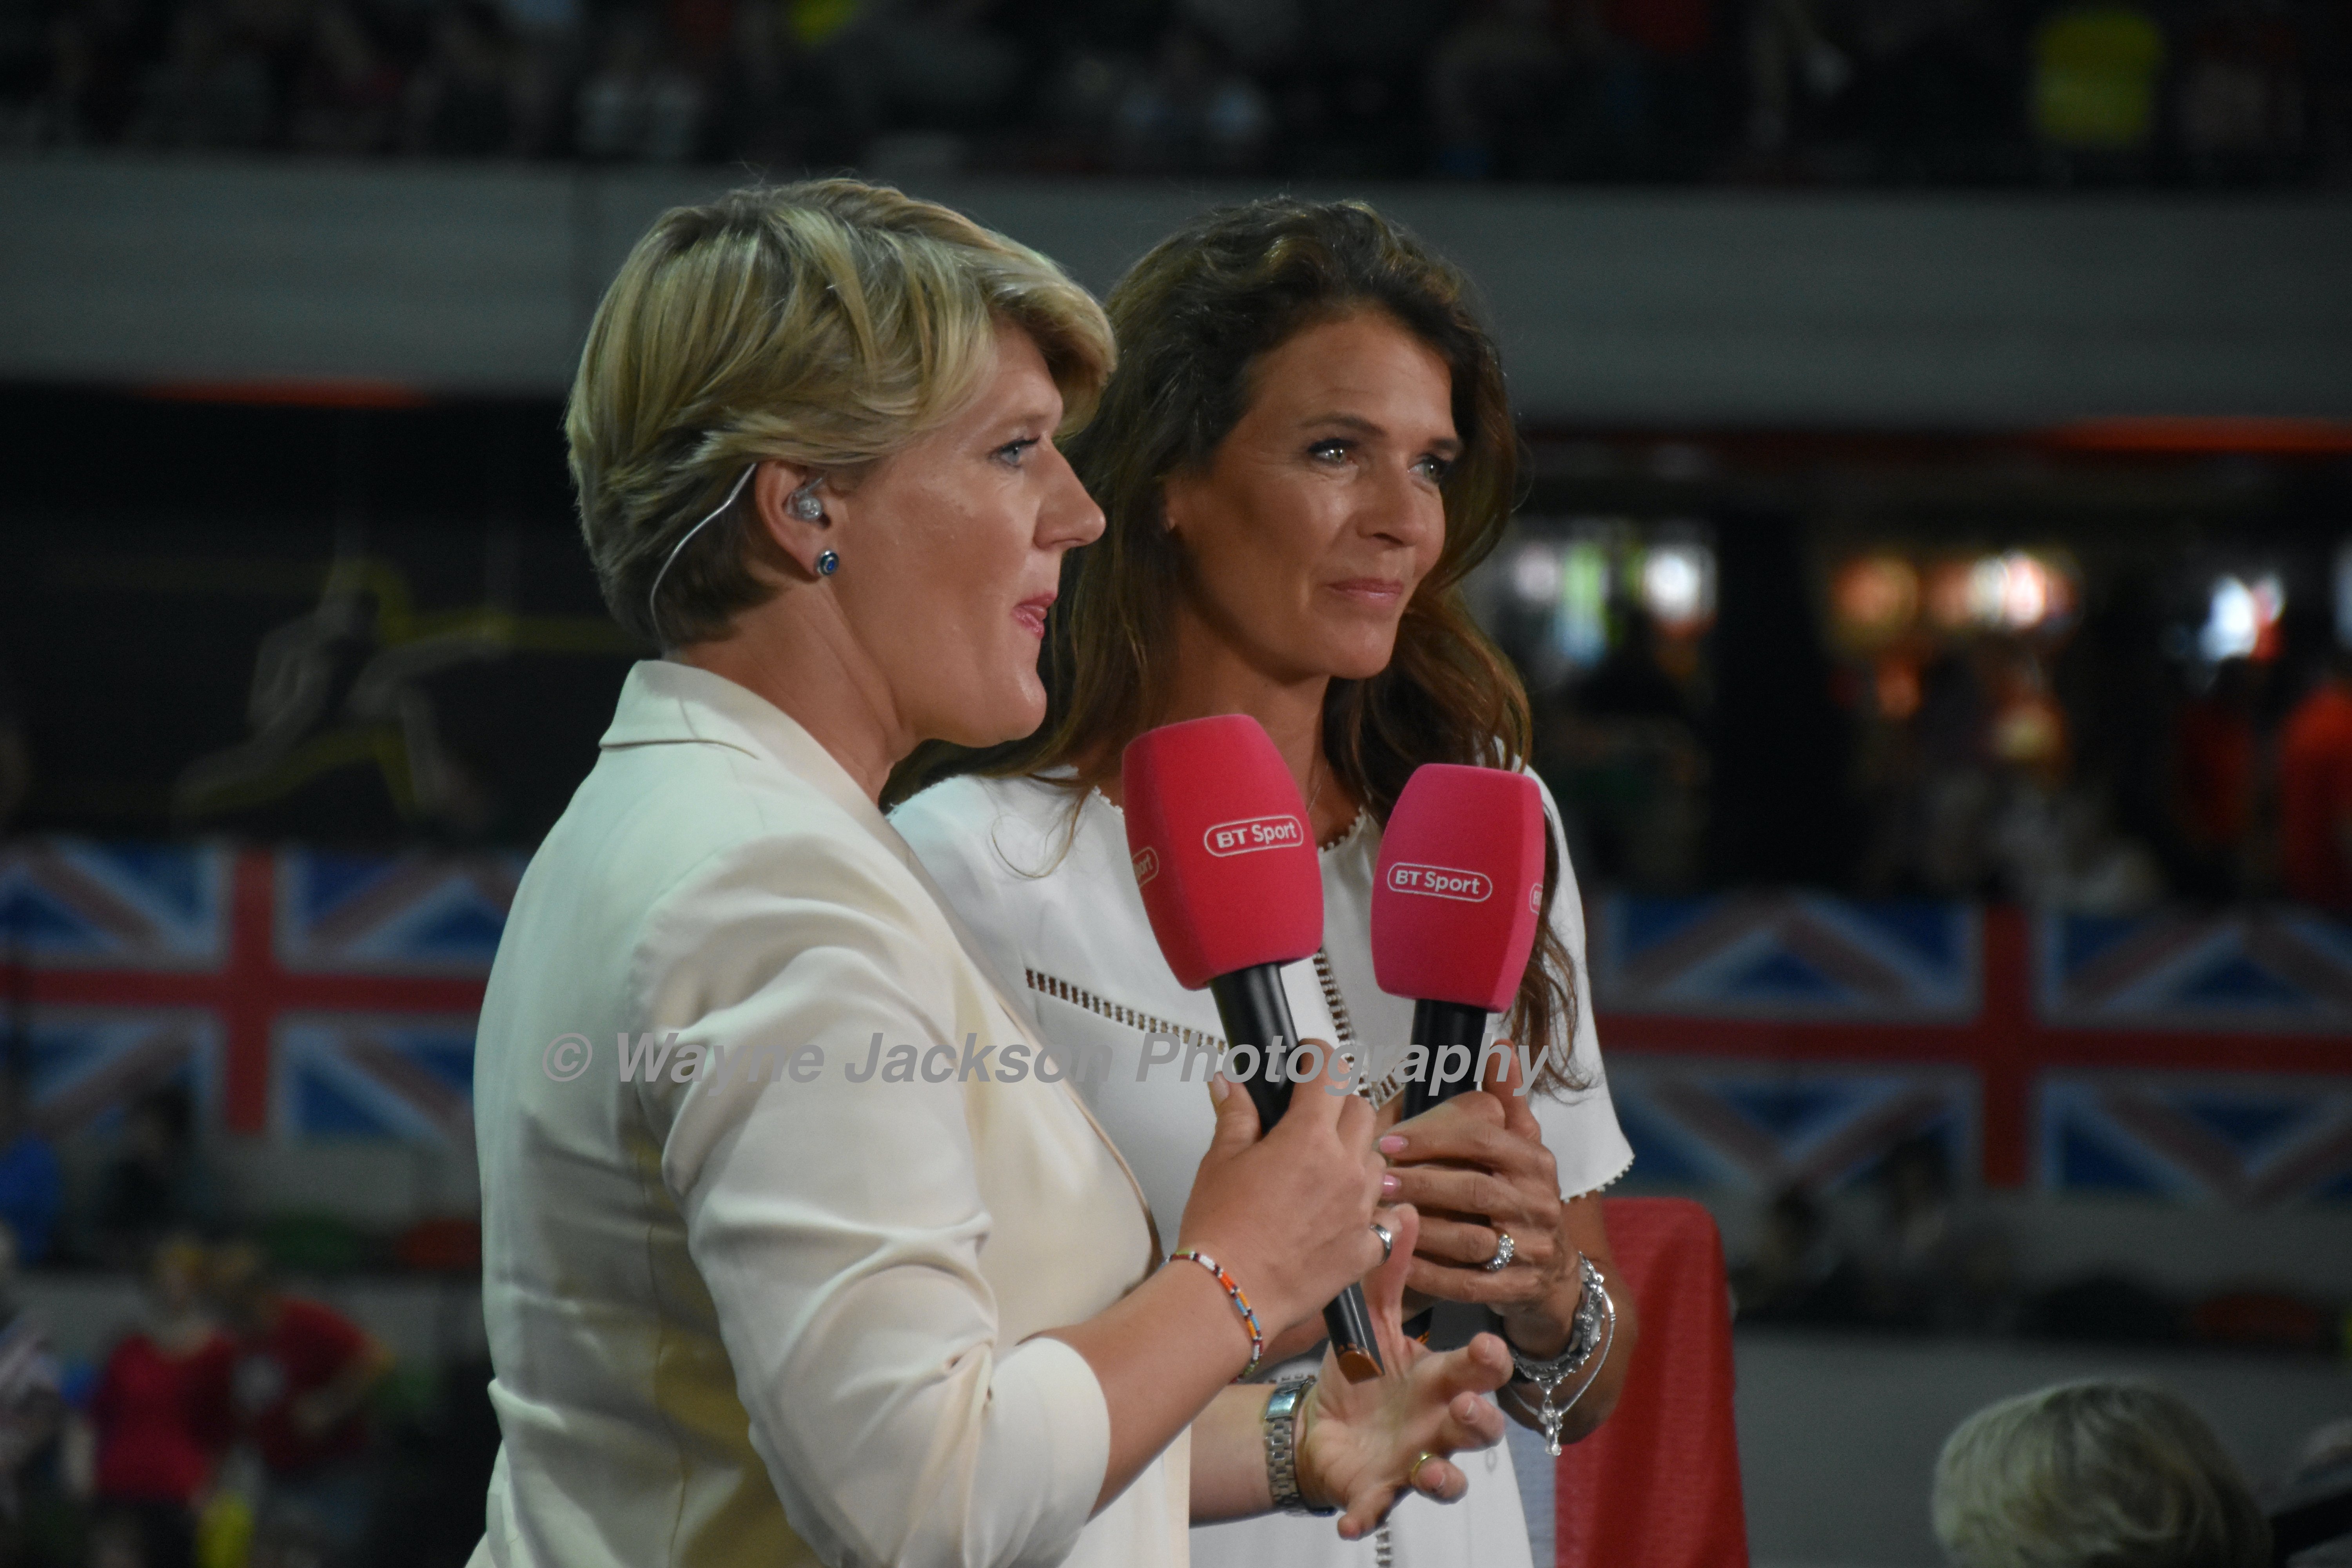 Clare Balding and Annabel Croft commentating on the women's tennis FED Cup for BT Sport